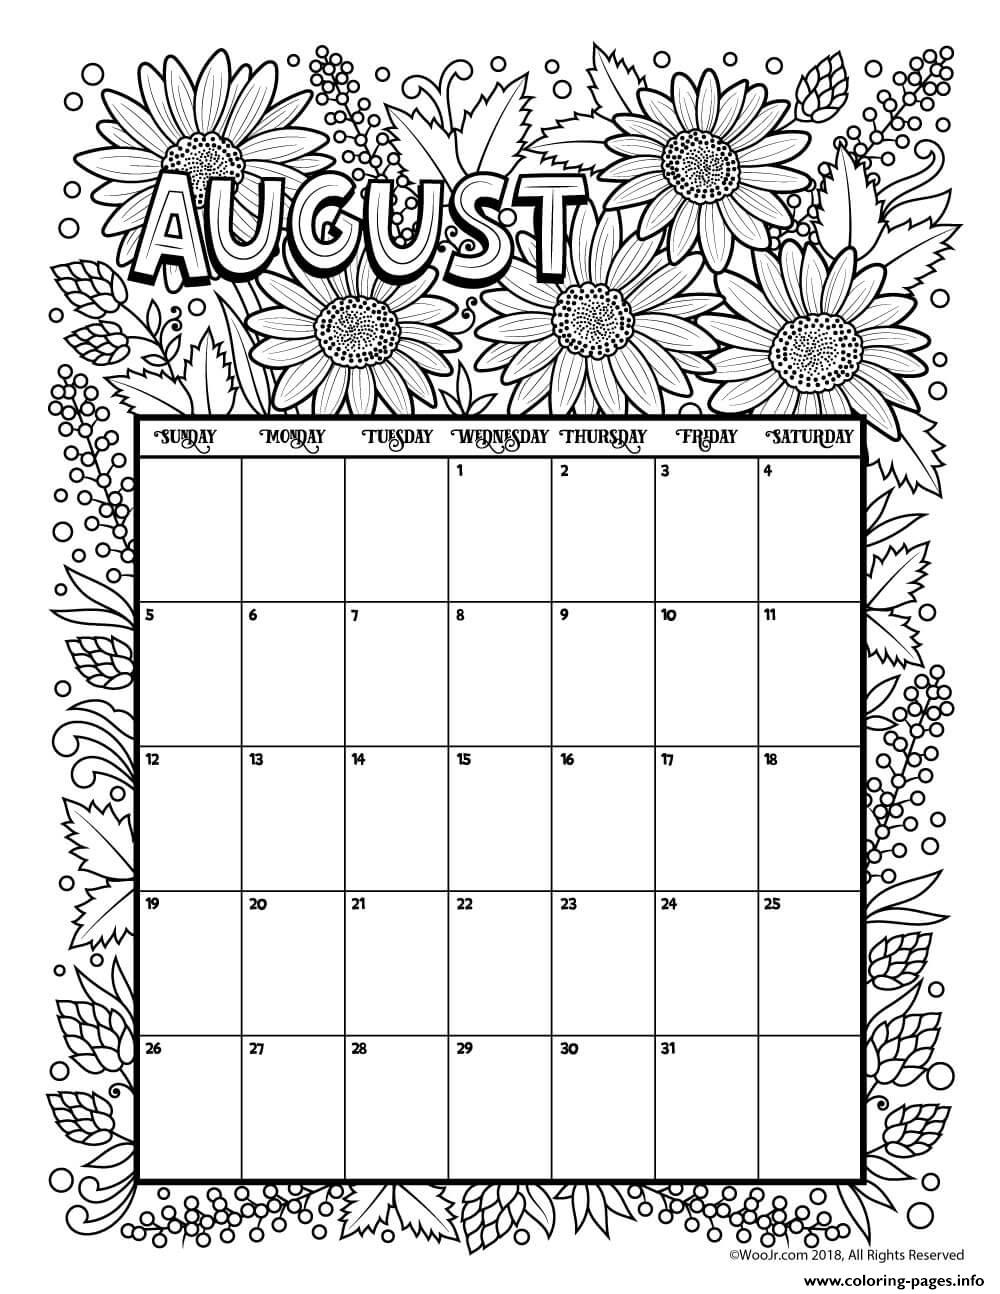 August Calendar Coloring page Printable